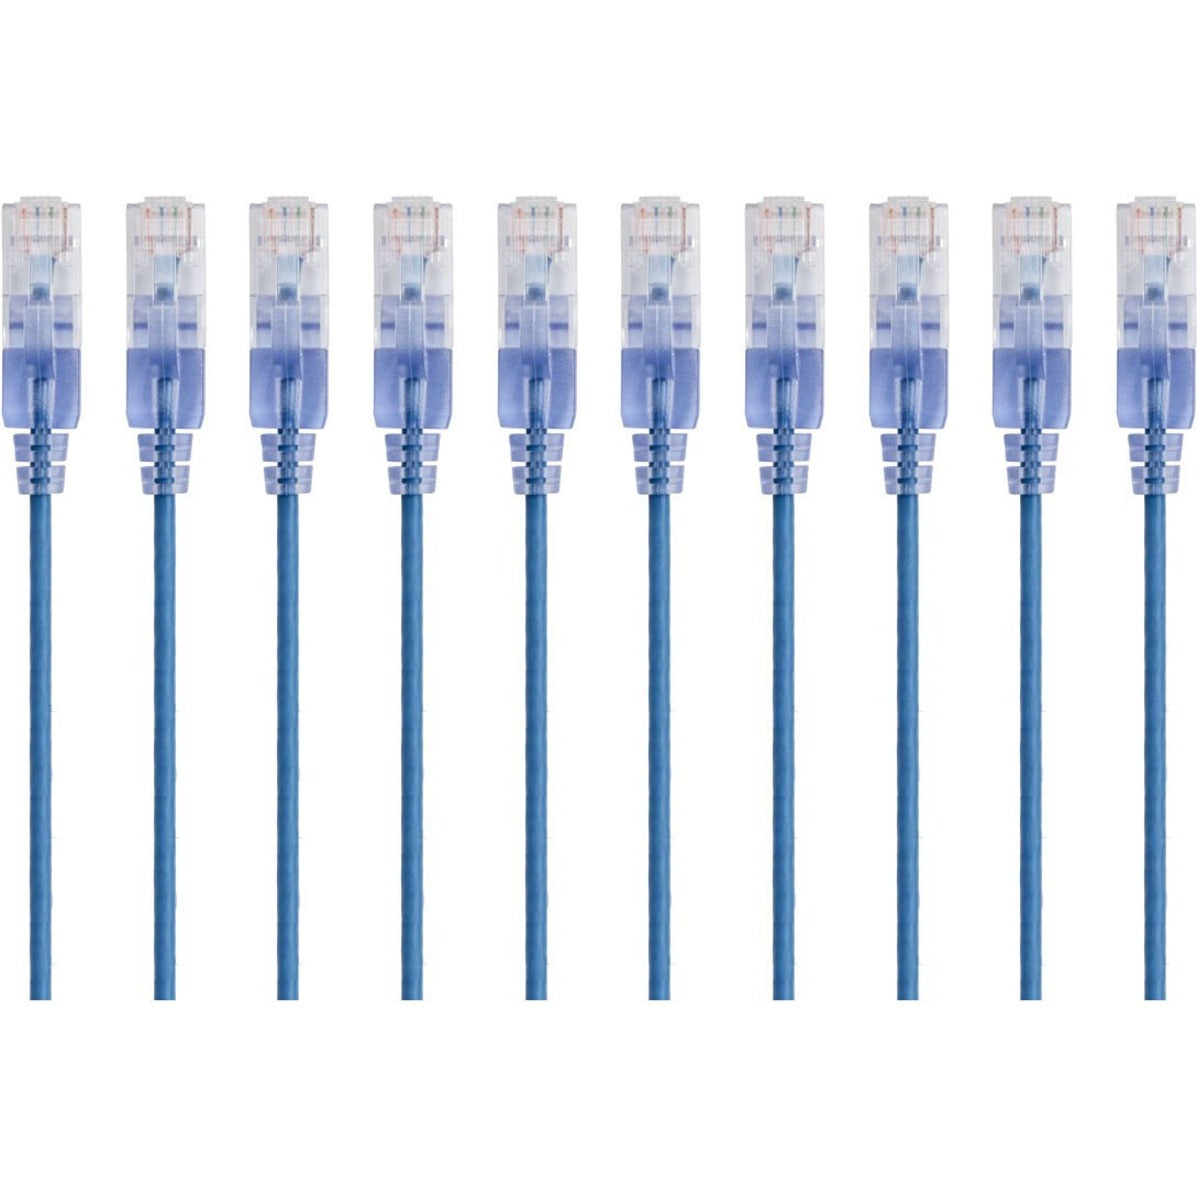 Monoprice 15166 SlimRun Cat6A Ethernet Network Patch Cable 10ft Blue, 10-Pack